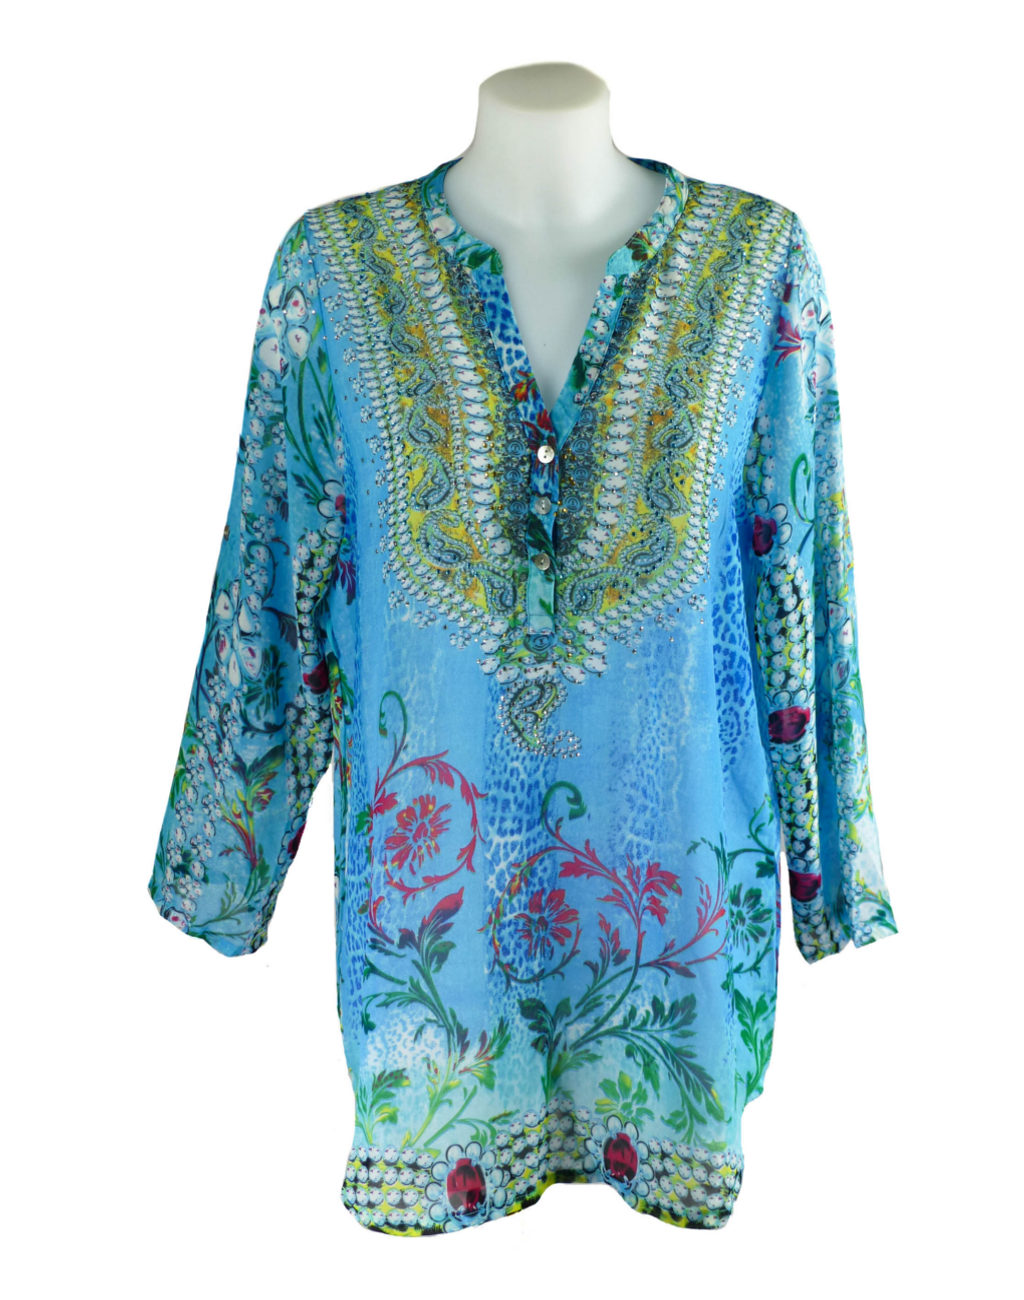 OPL French Style Paisley Print Summer Tunic Top